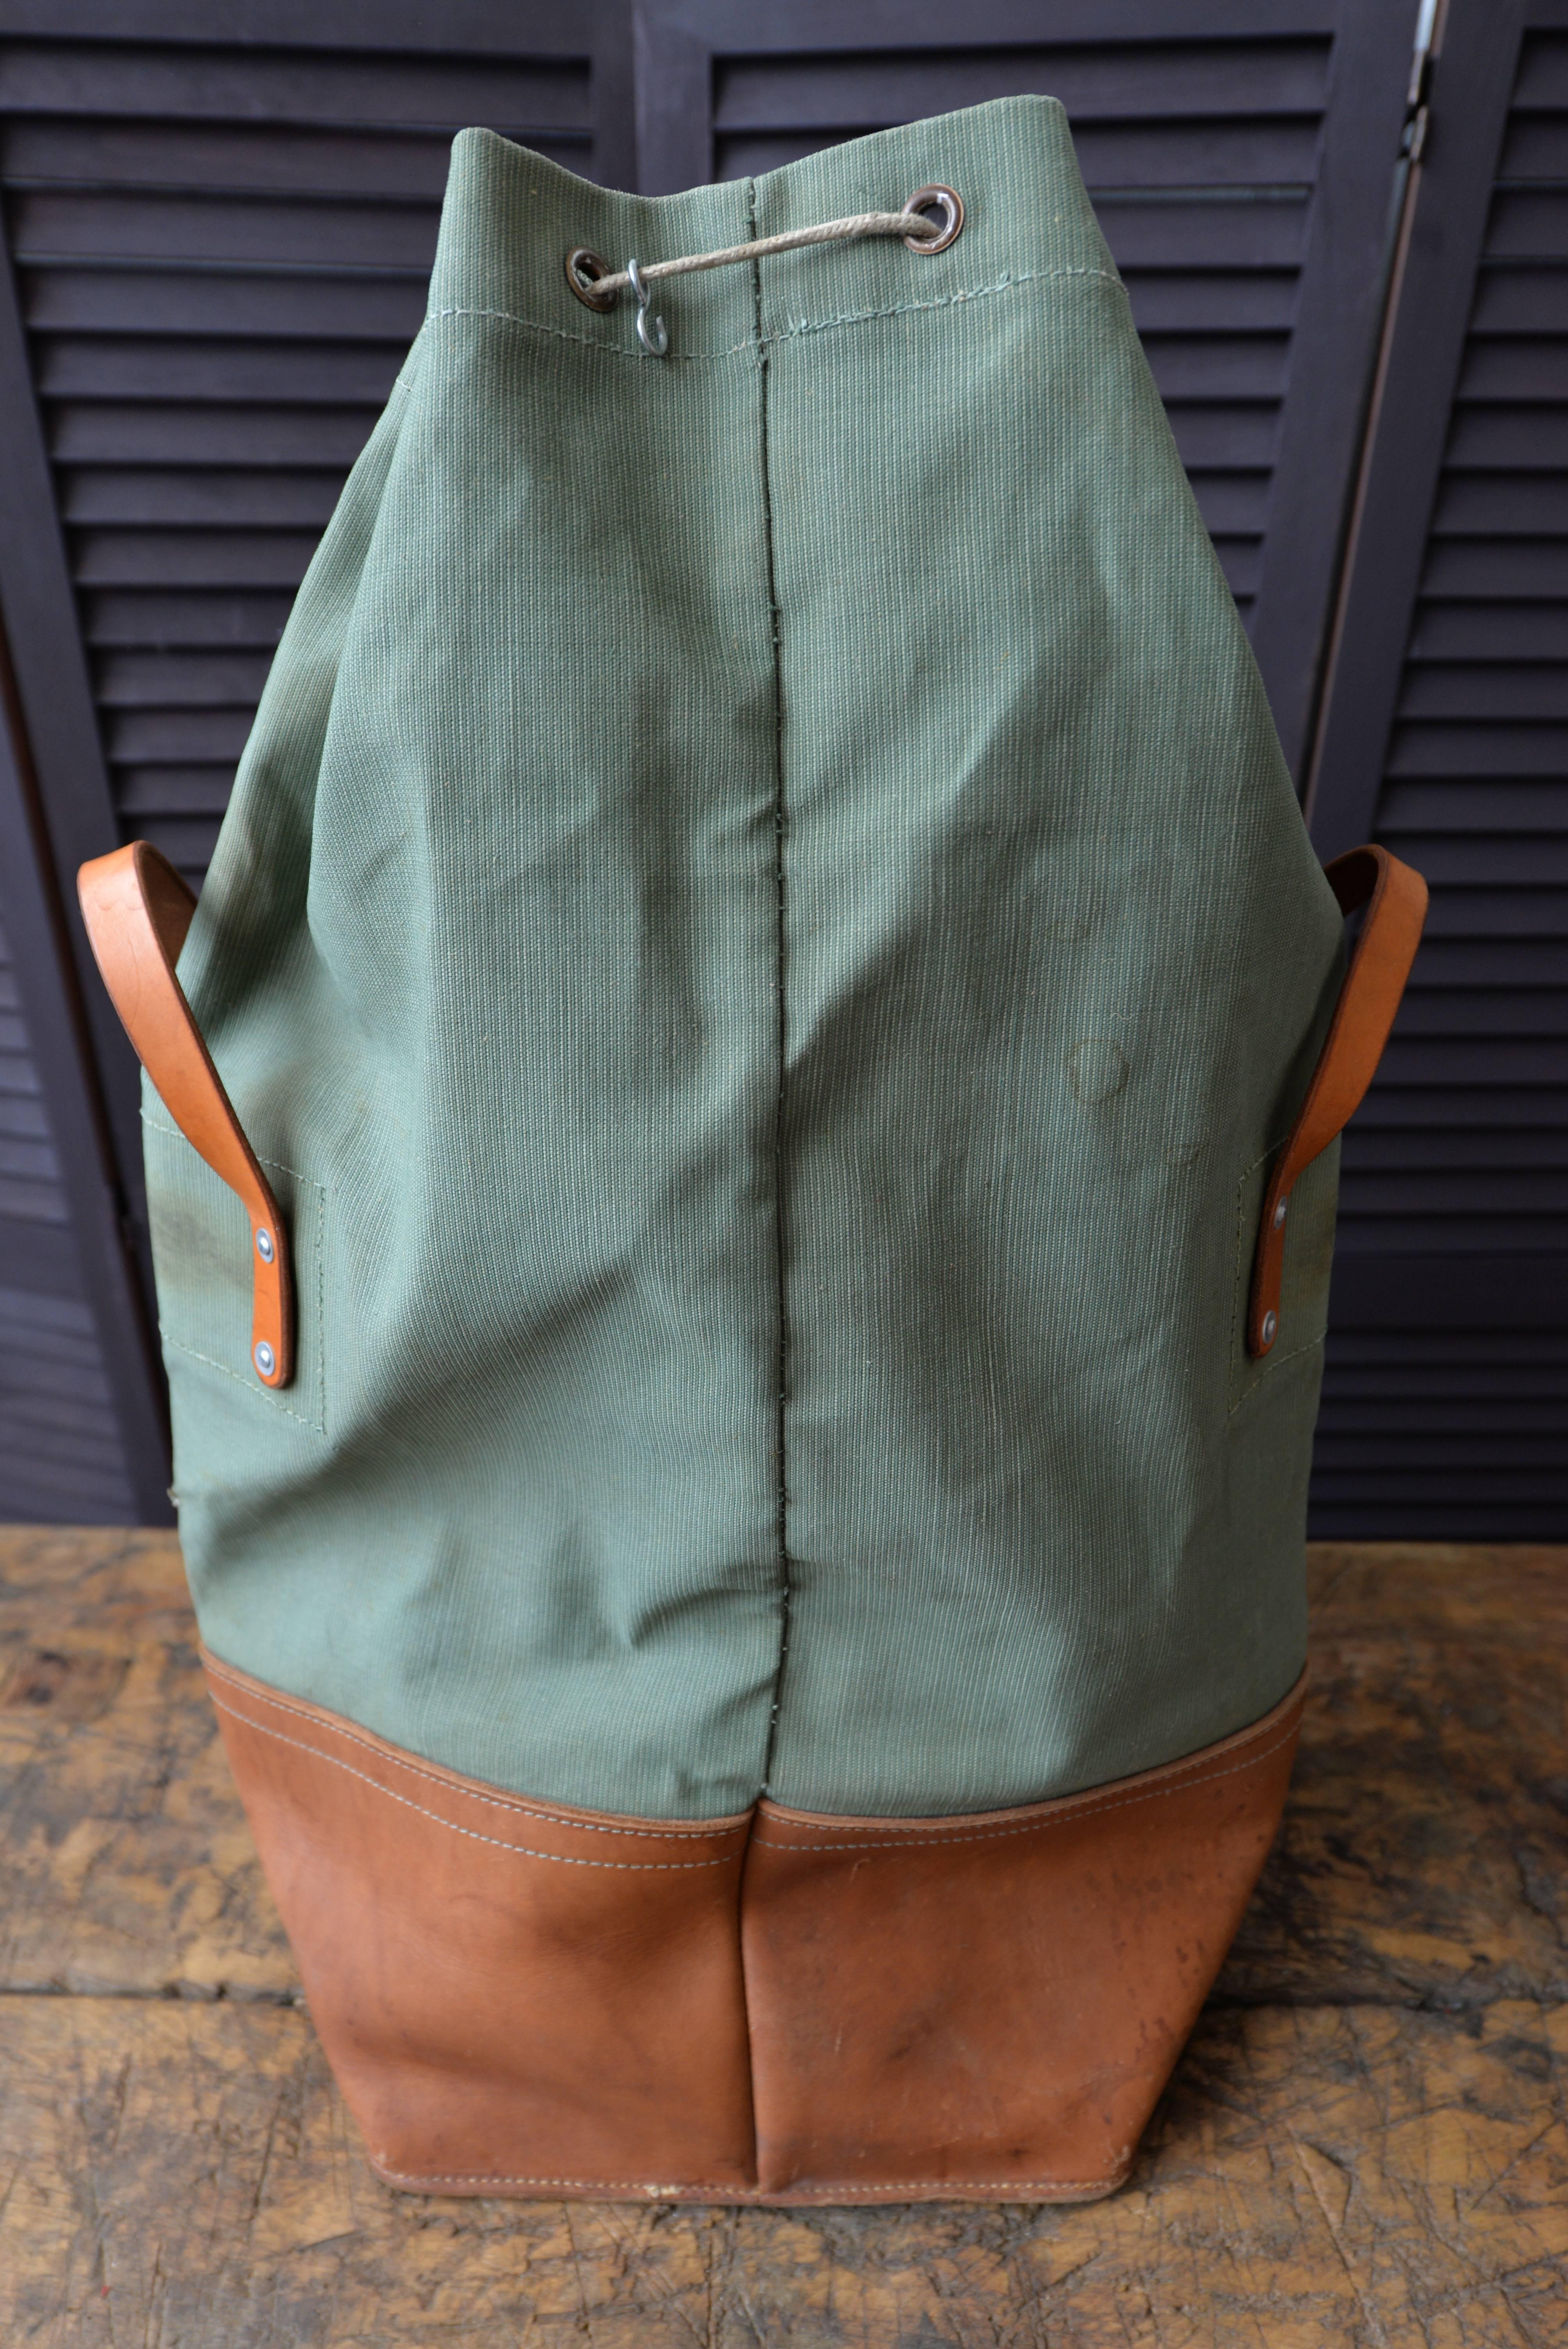 20th Century 1970s Swiss Army Military Leather Backpack or Shoulder Bag